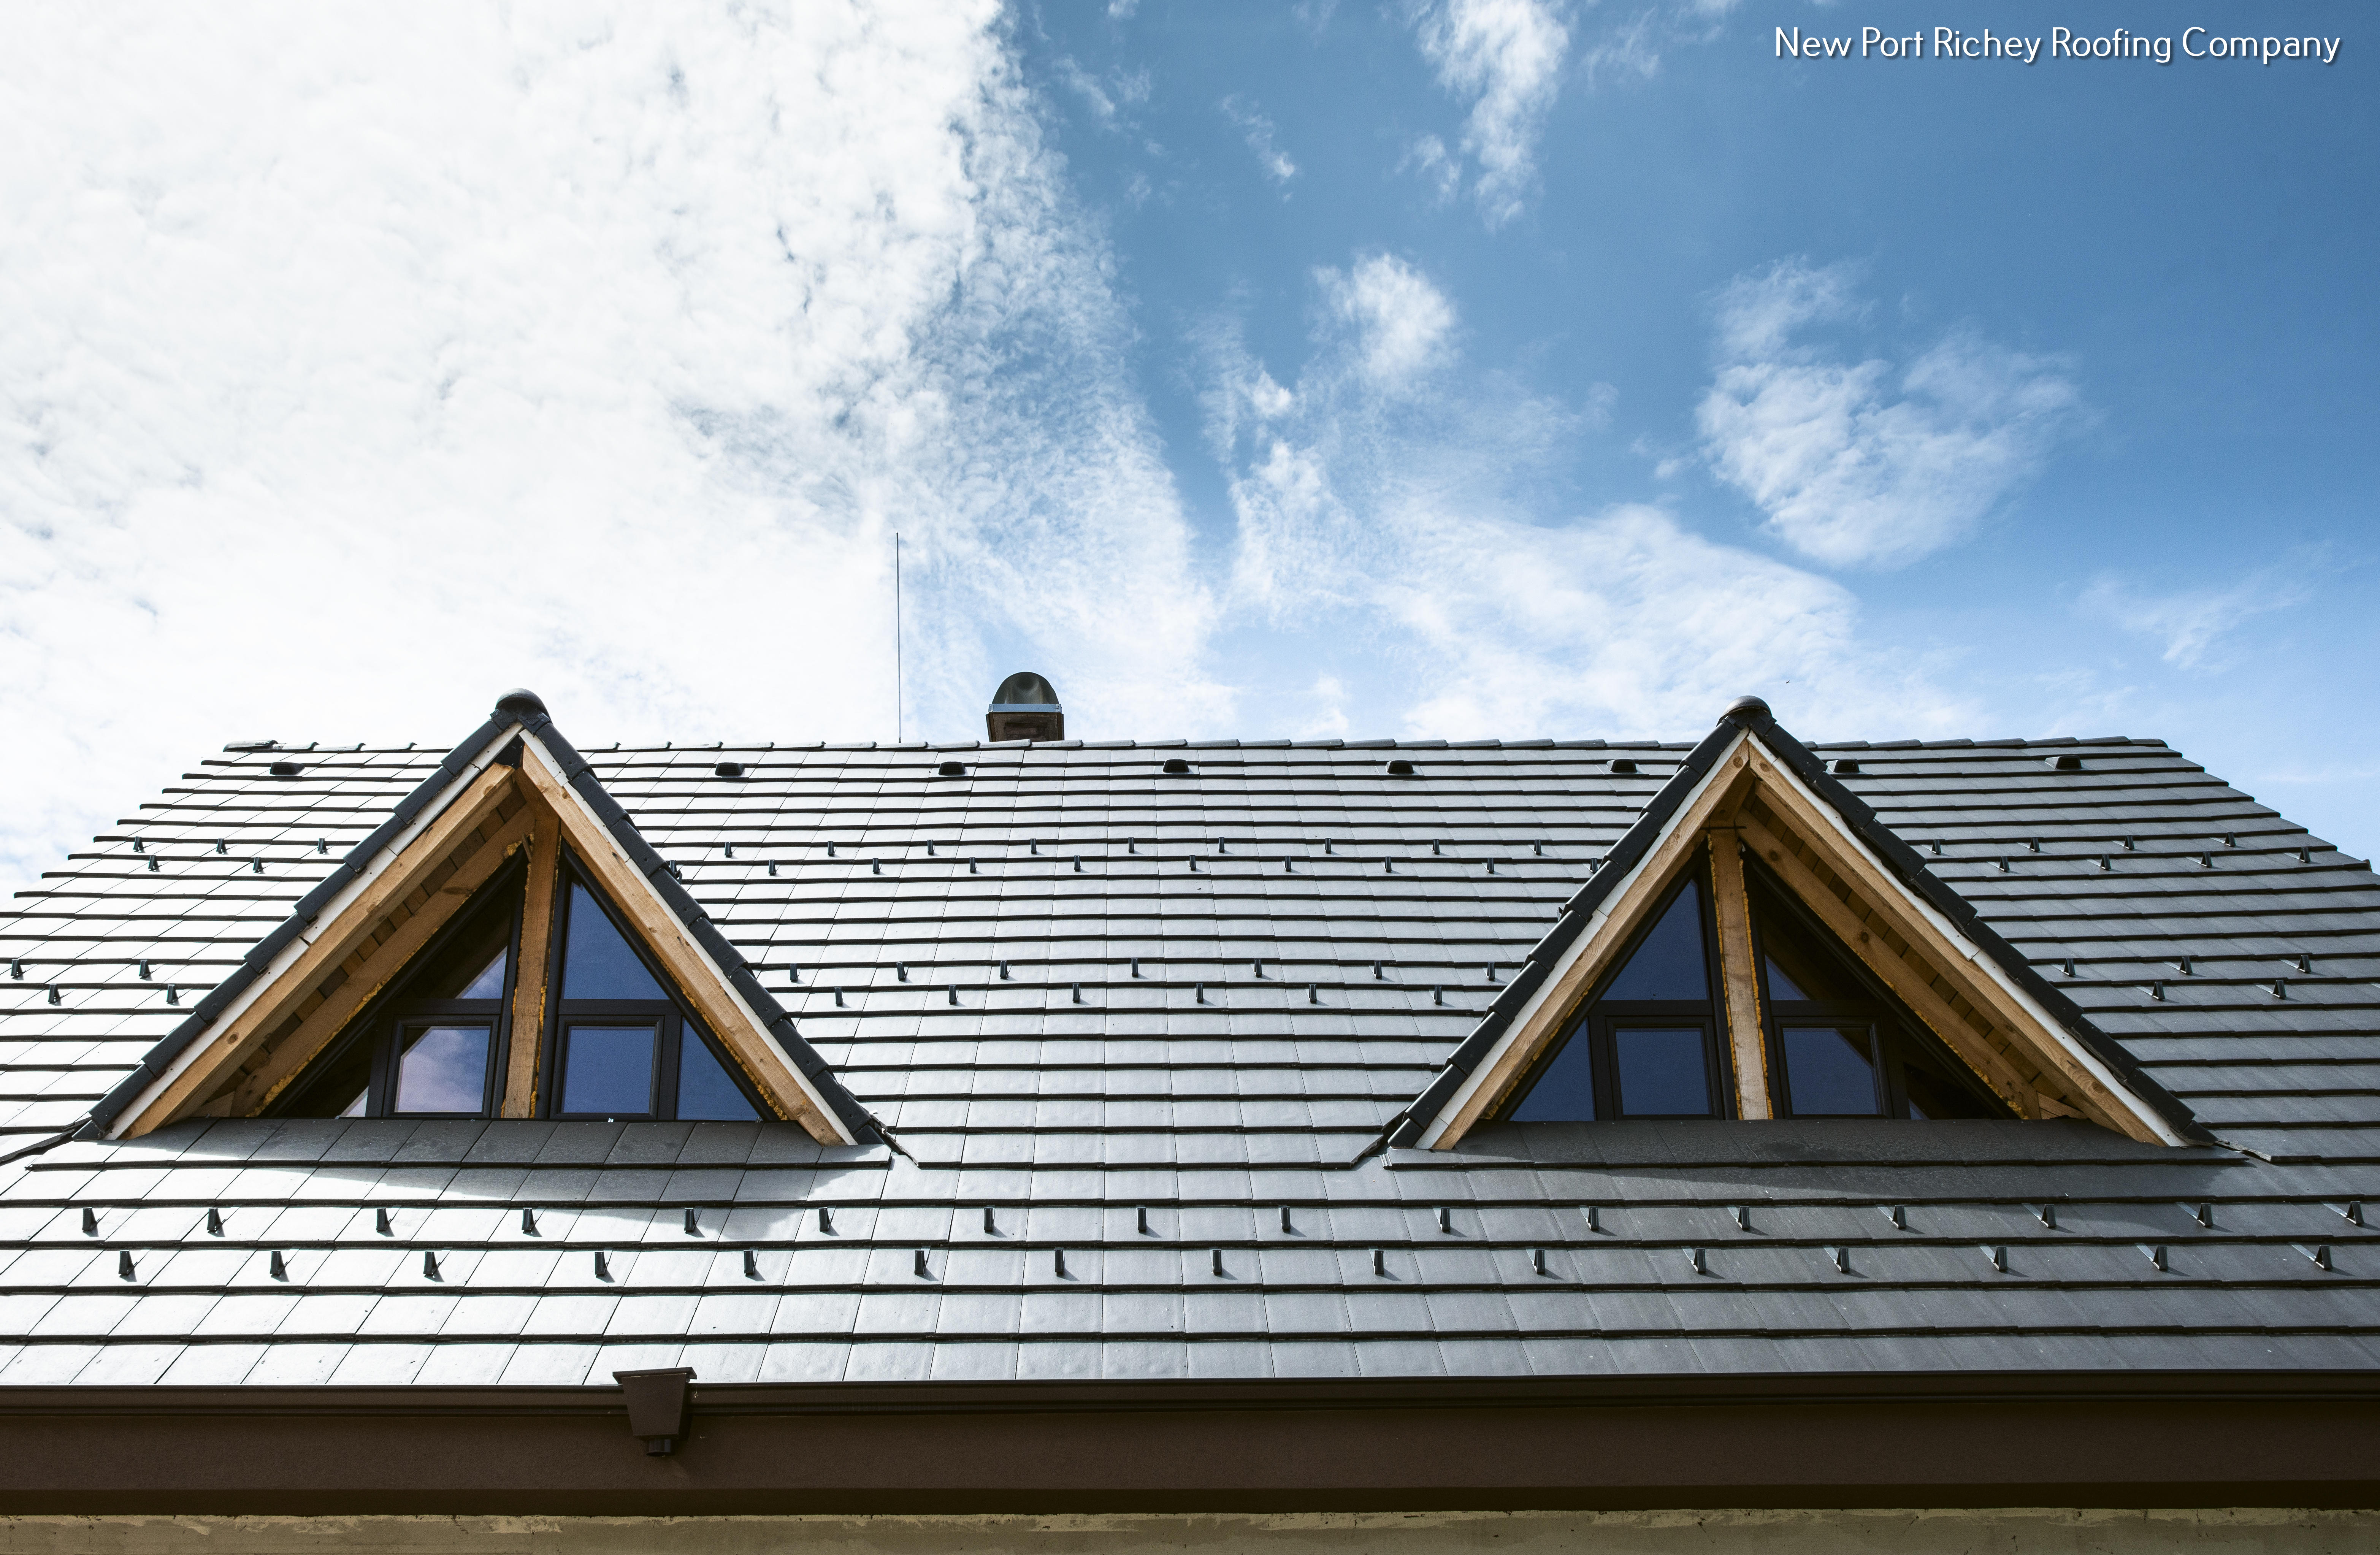 The Roofing Company Shares More Details About their Preferred Roofing Manufacturer